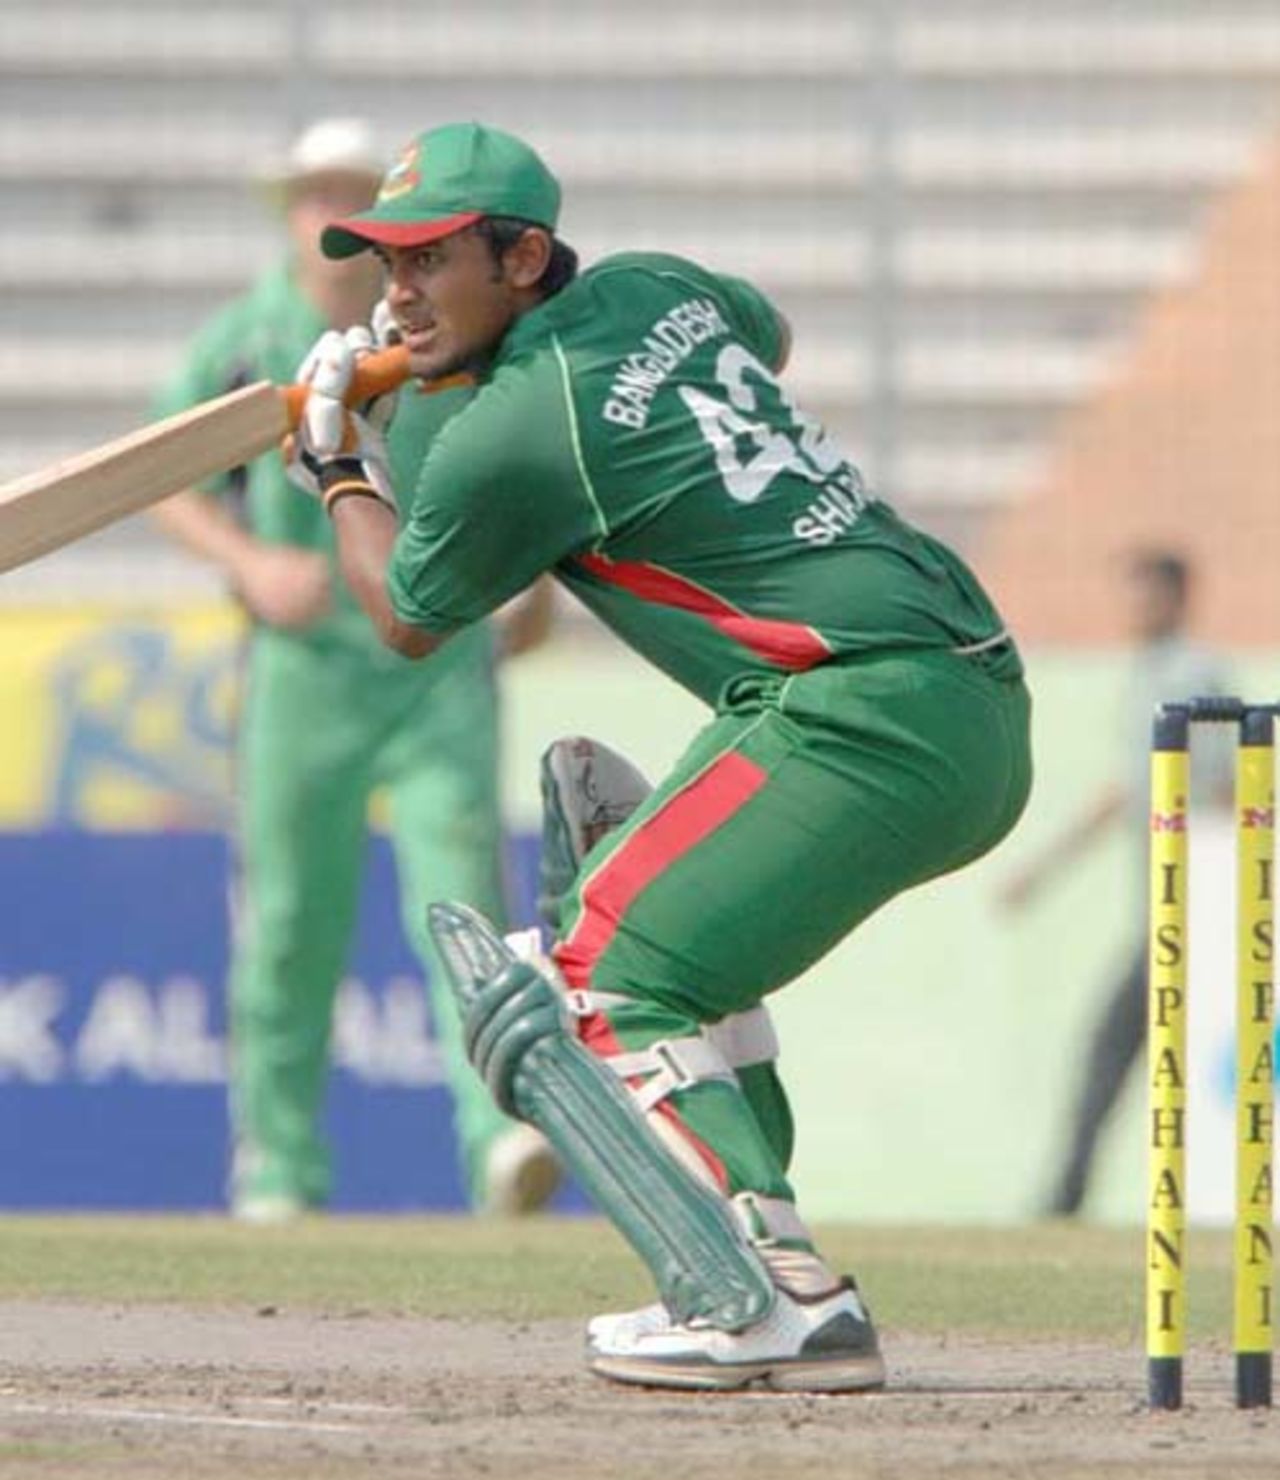 Shahriar Nafees guides the ball on his way to 90 not out, Bangladesh v Ireland, 1st ODI, Mirpur, March 18, 2008 